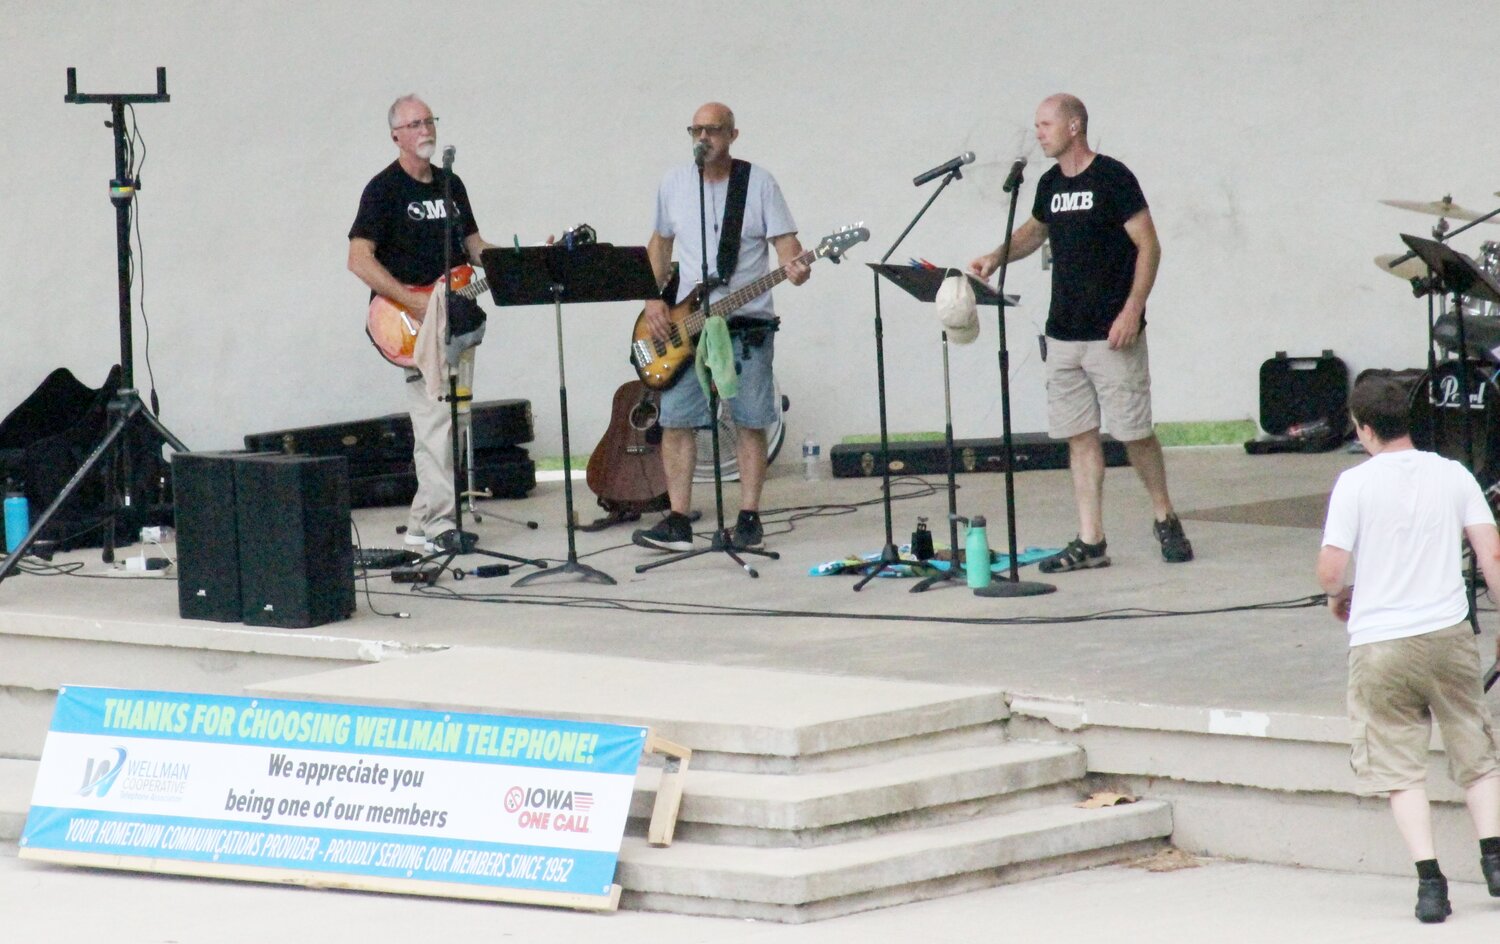 Old Man Band kept spirits high during their performance at the bandshell.